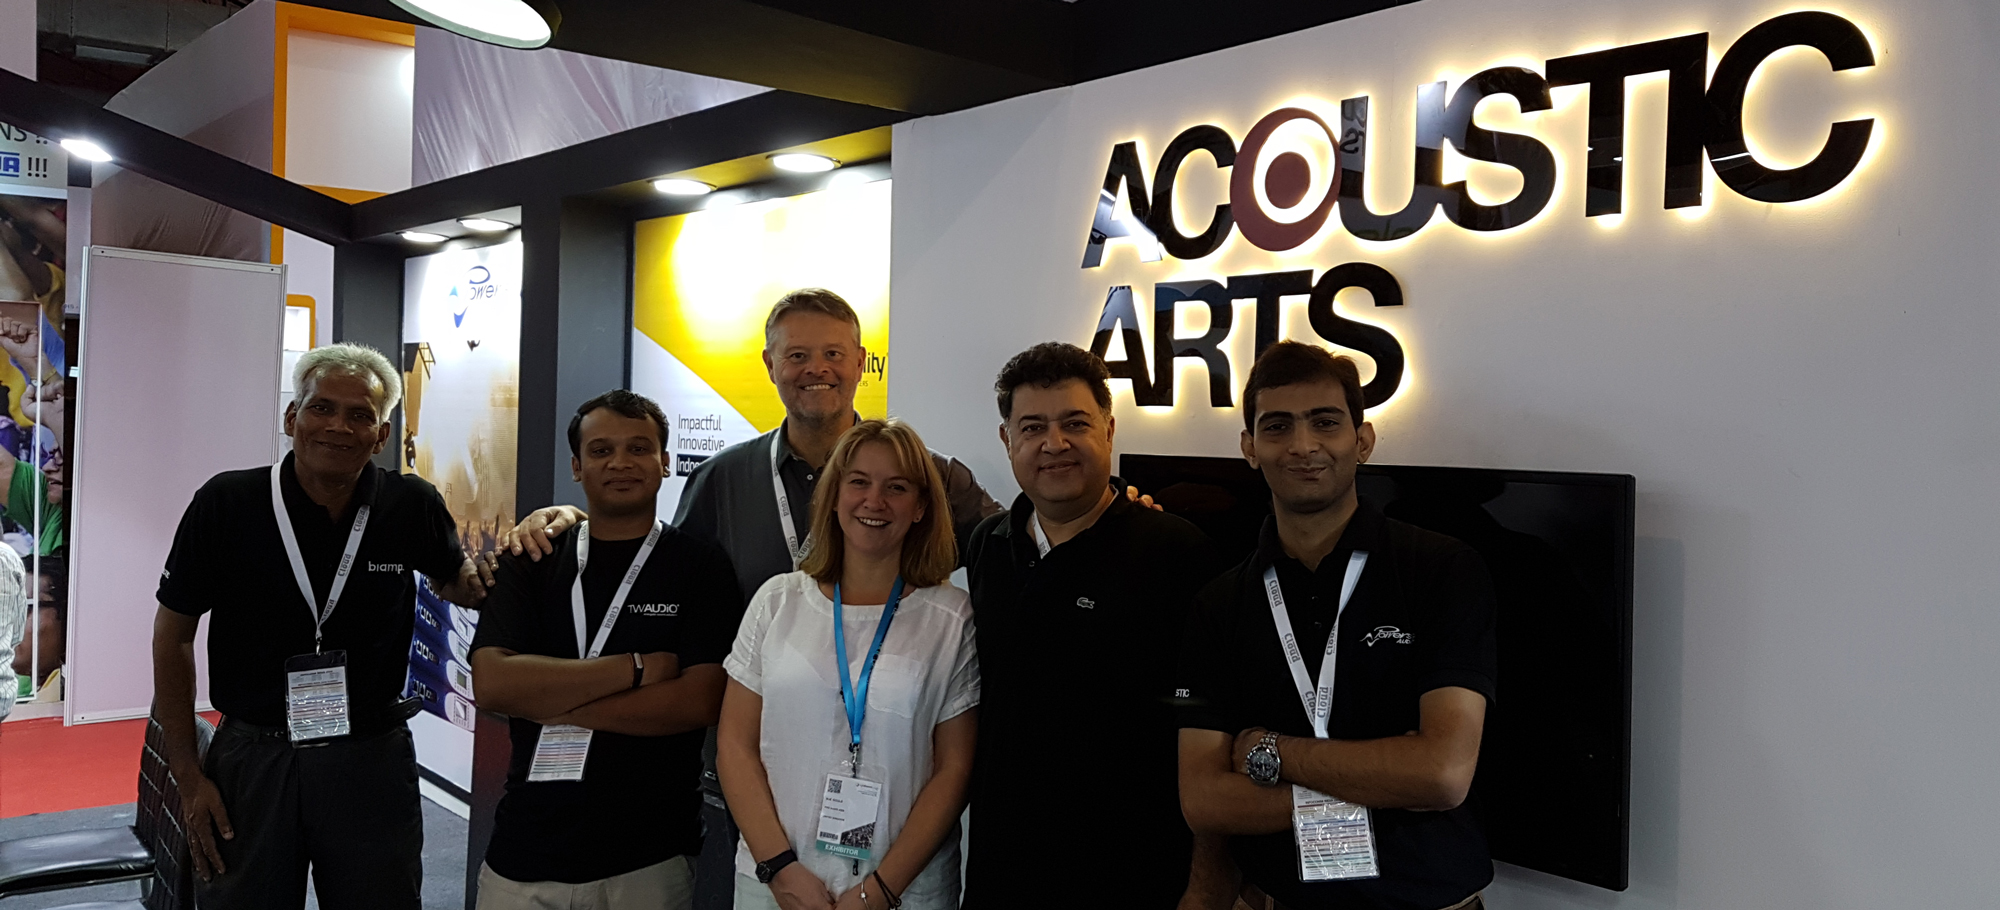 Cloud exhibits at Infocomm India 16 with Acoustic Arts